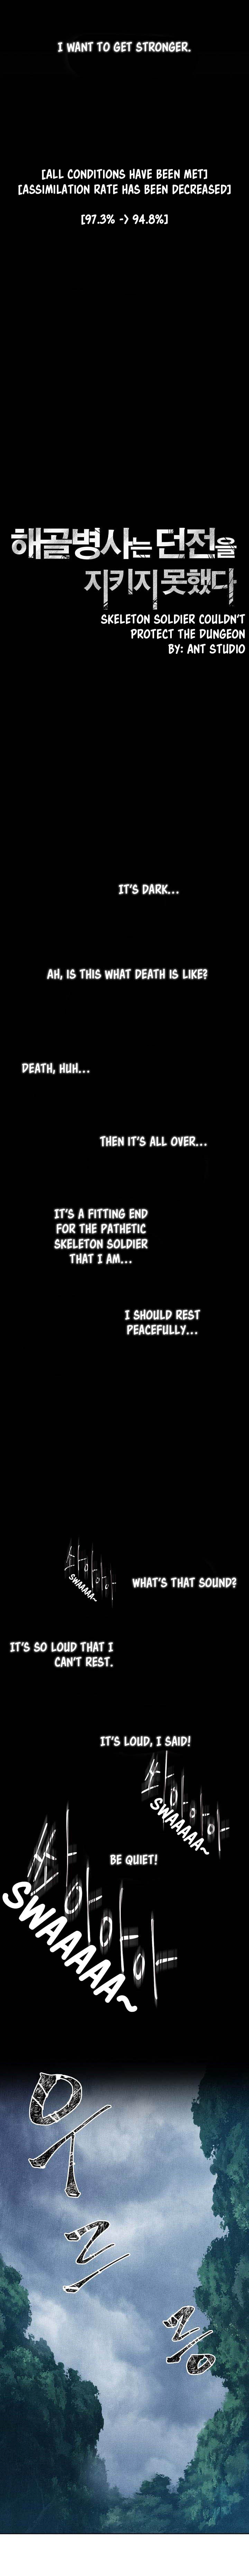 skeleton-soldier-couldnt-protect-the-dungeon-chap-1-3